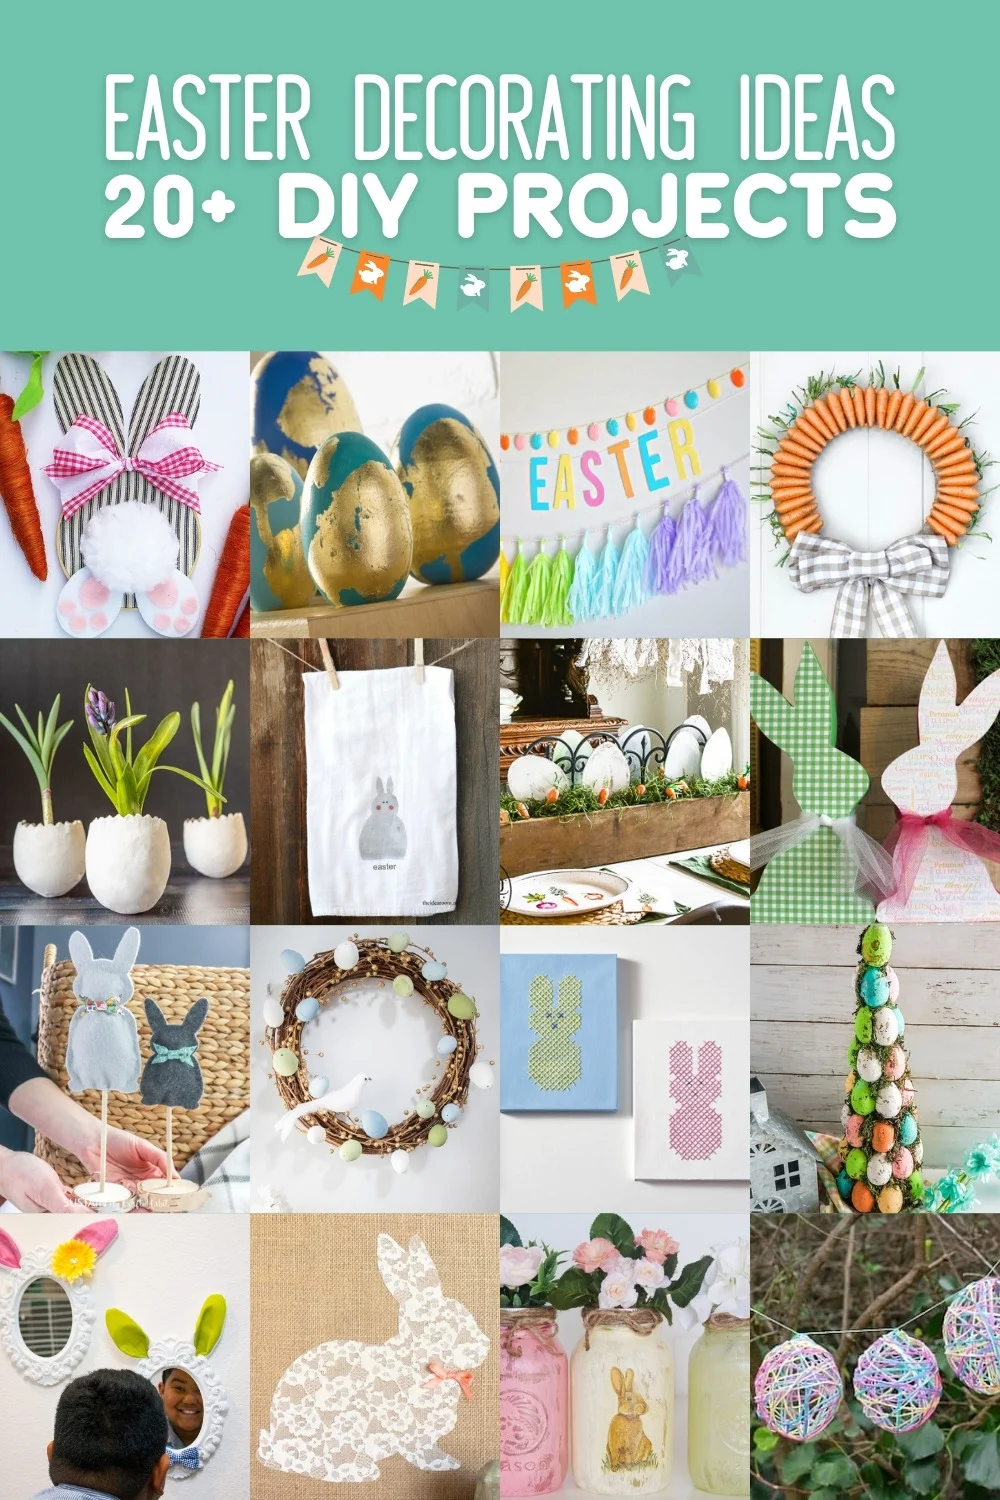 Update more than 145 easter sunday decorating ideas - seven.edu.vn